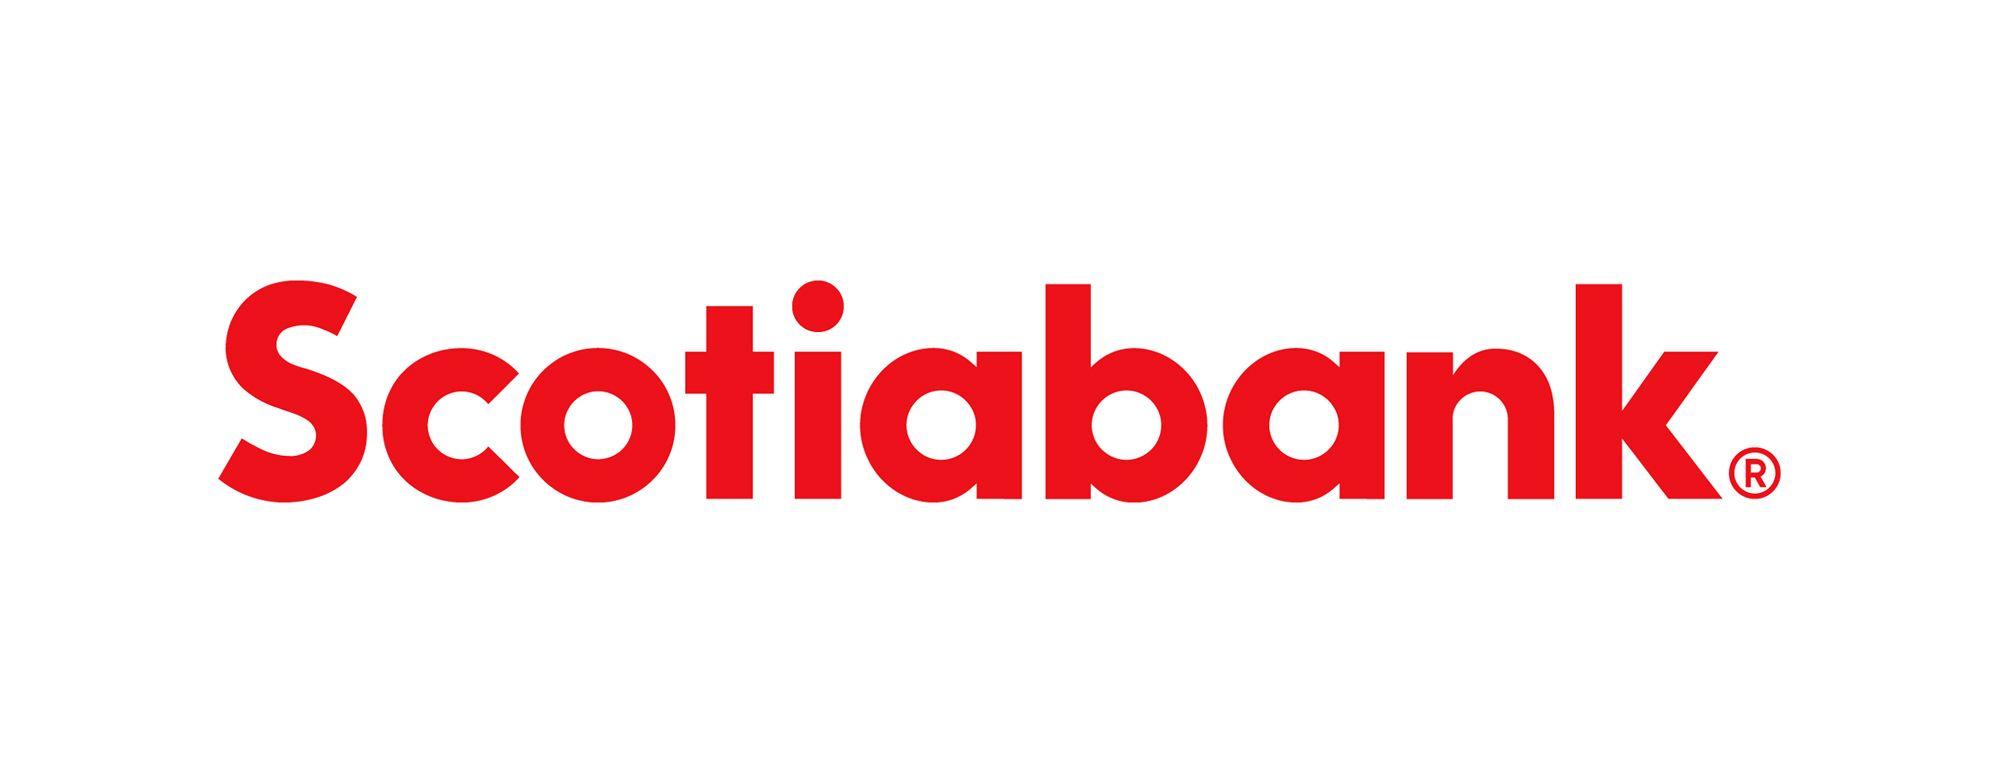 Less Logo - Less is More? Scotiabank Rebrands their Identity